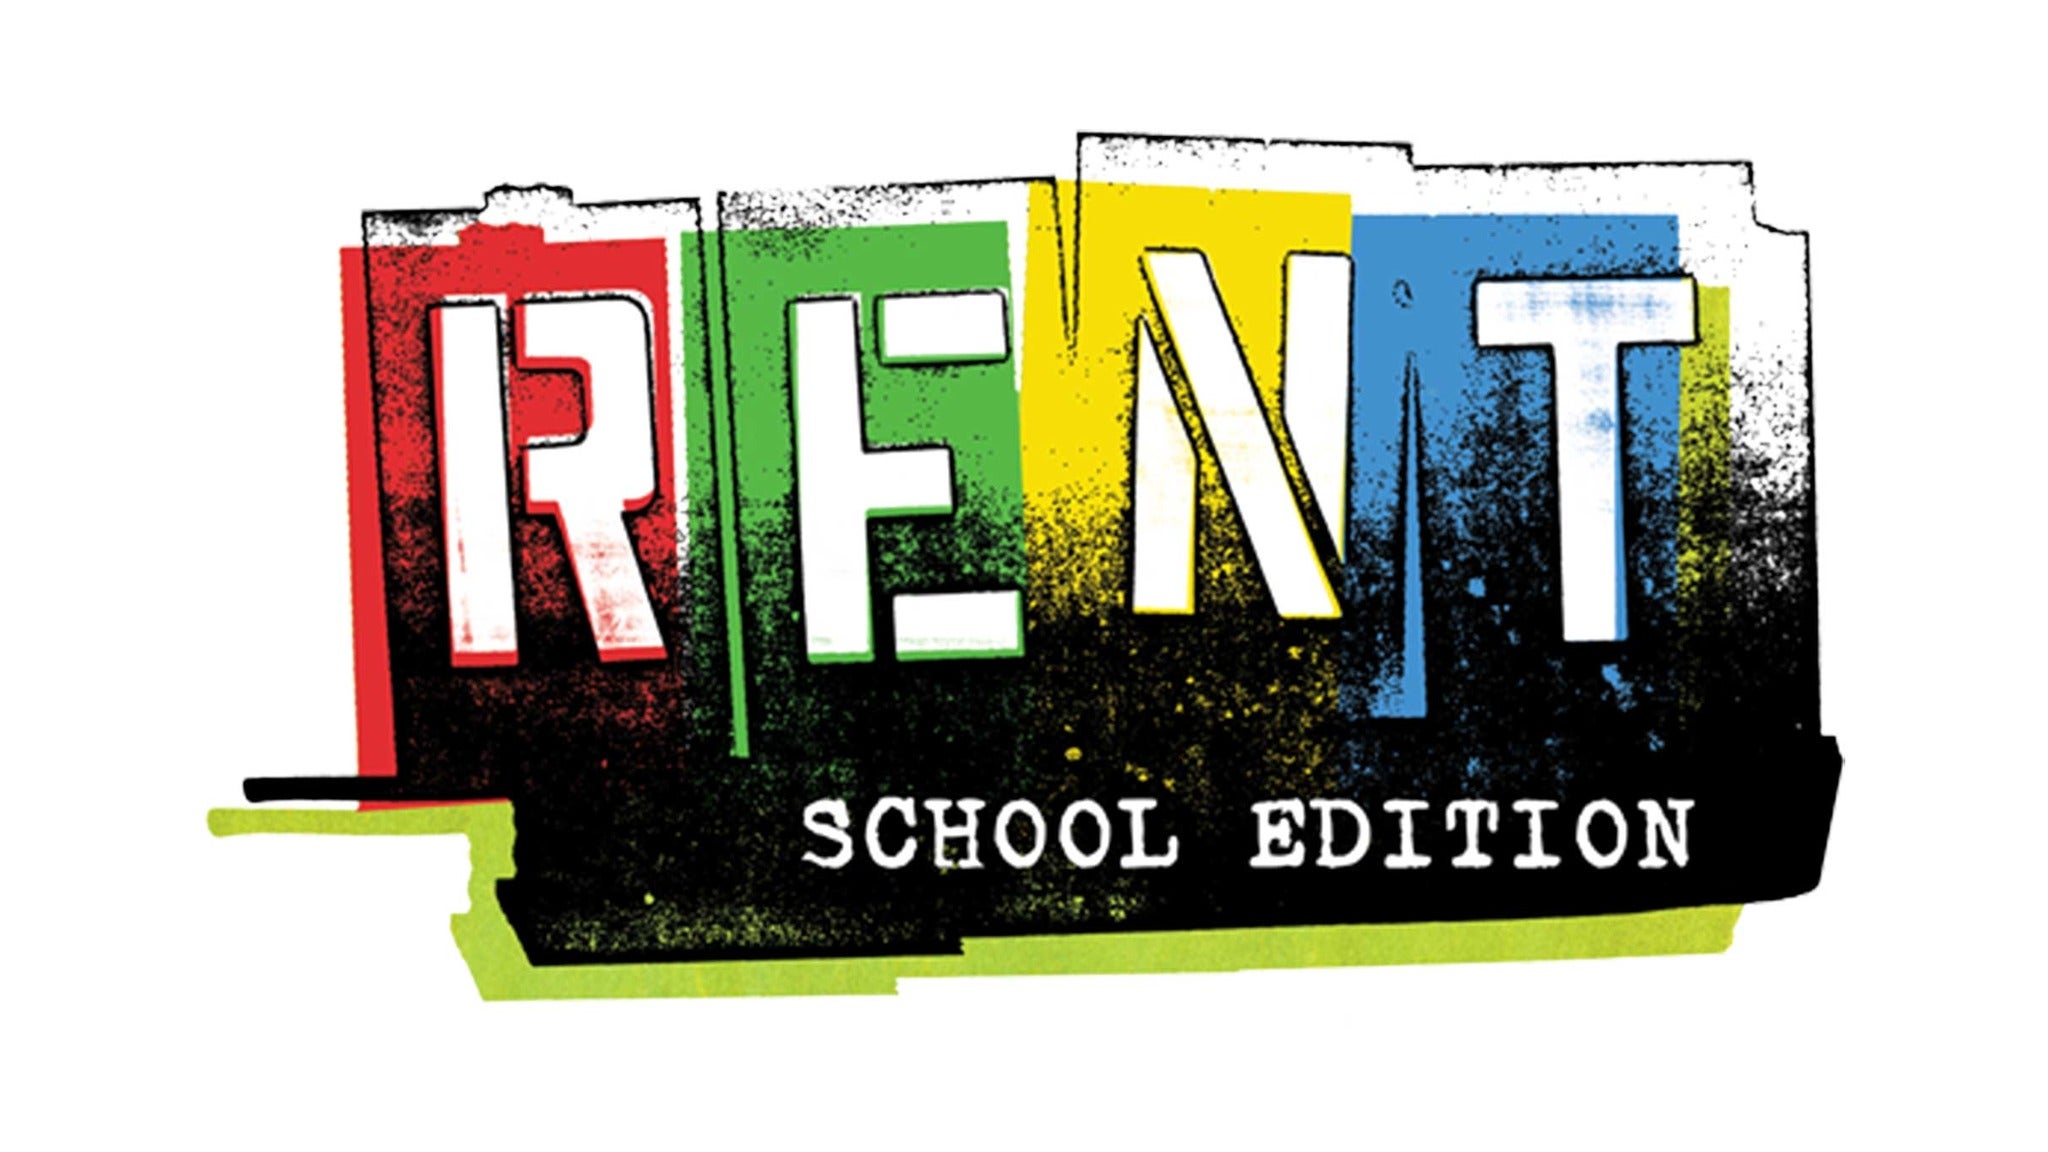 Rent (Touring) in Joliet promo photo for Exclusive presale offer code